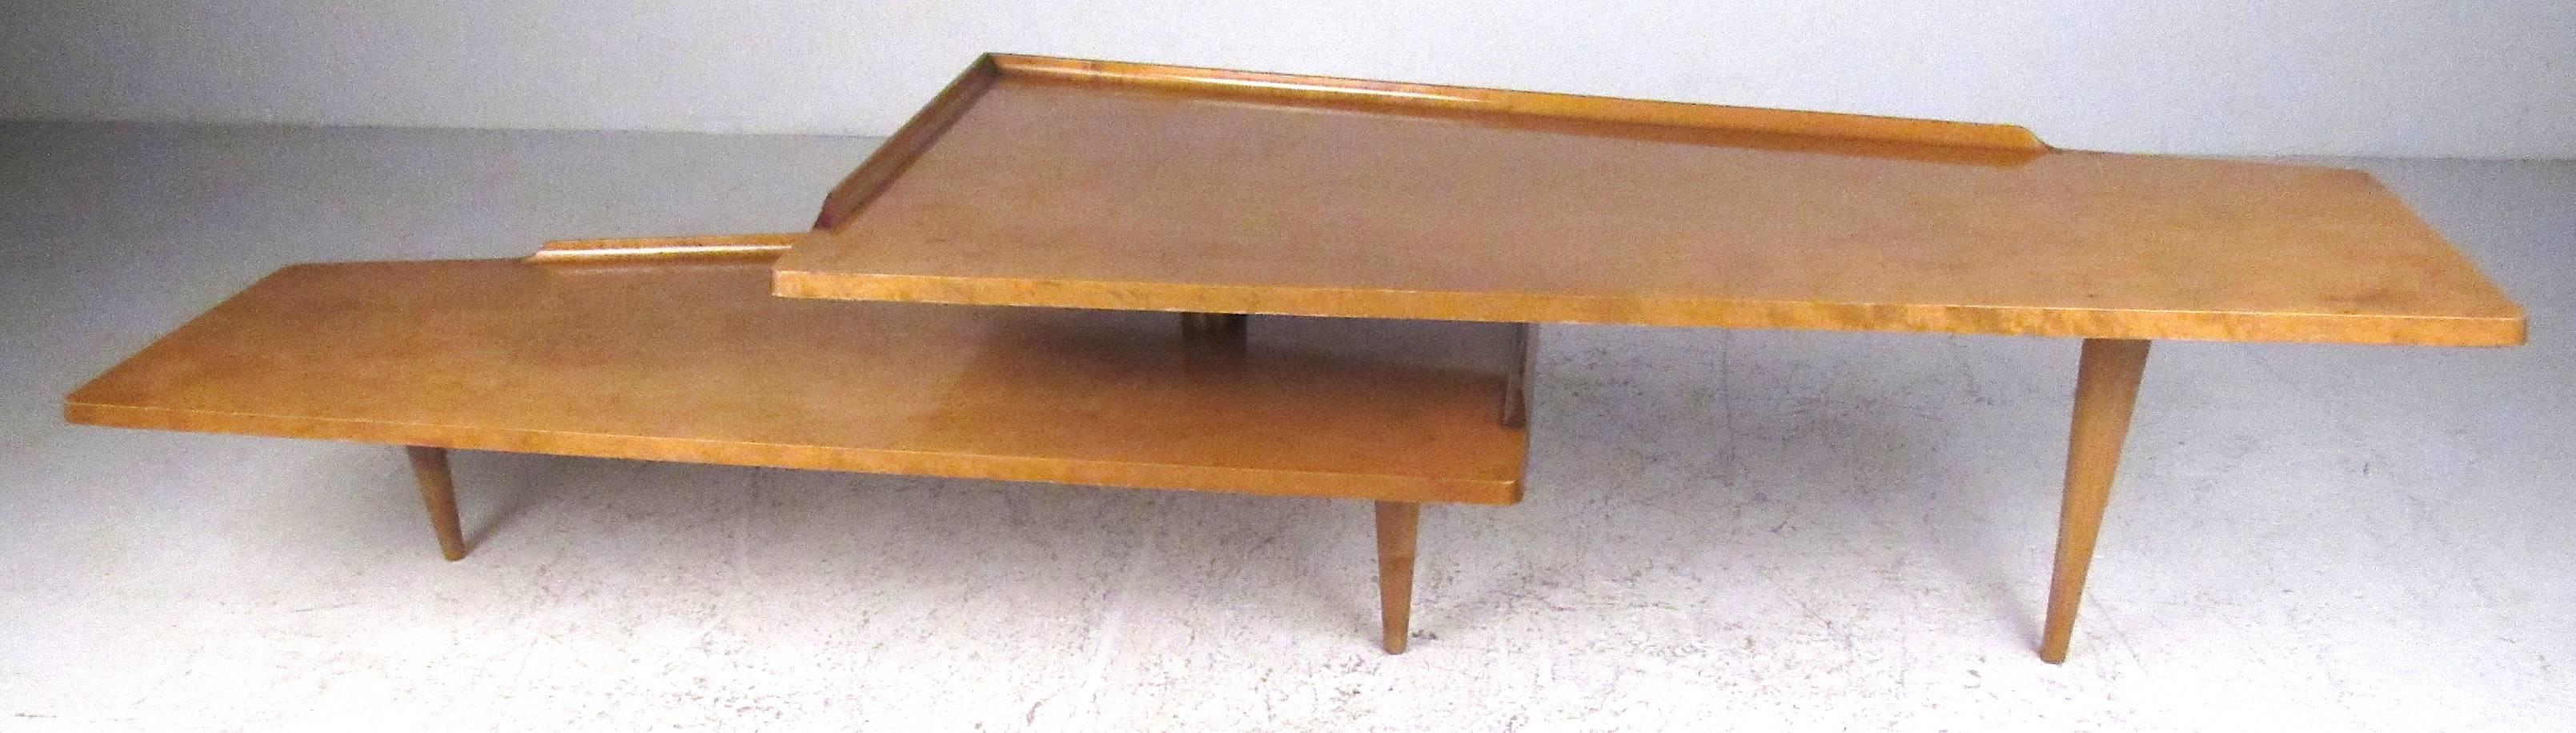 Mid-Century Modern Midcentury Pivot Style Coffee Table For Sale